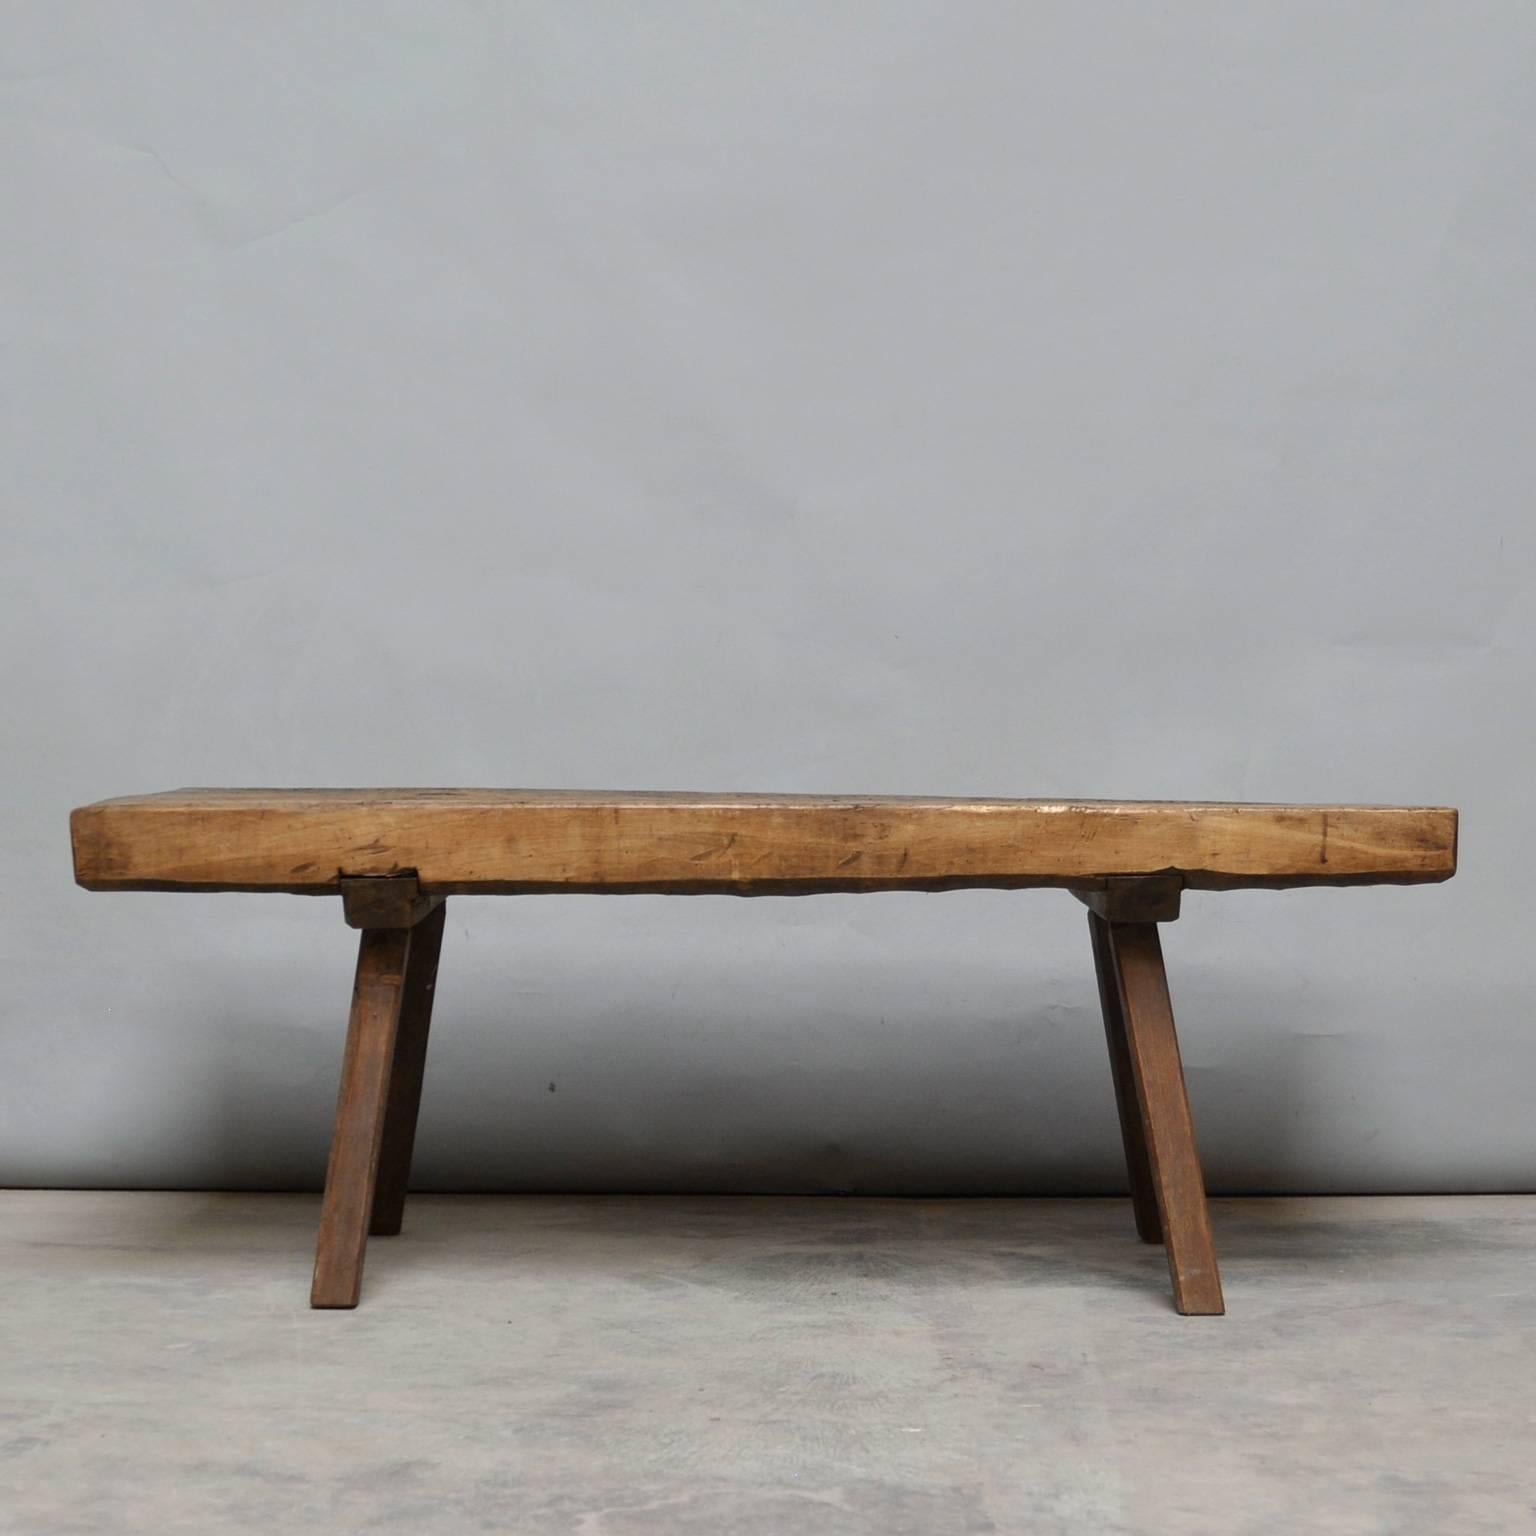 This oak butcher's block was produced in Hungary around the 1930s and has a 10 cm thick top. The piece features the original oak legs, and has been wax-finished. The legs has been cut down to a standard coffee table or bench size.